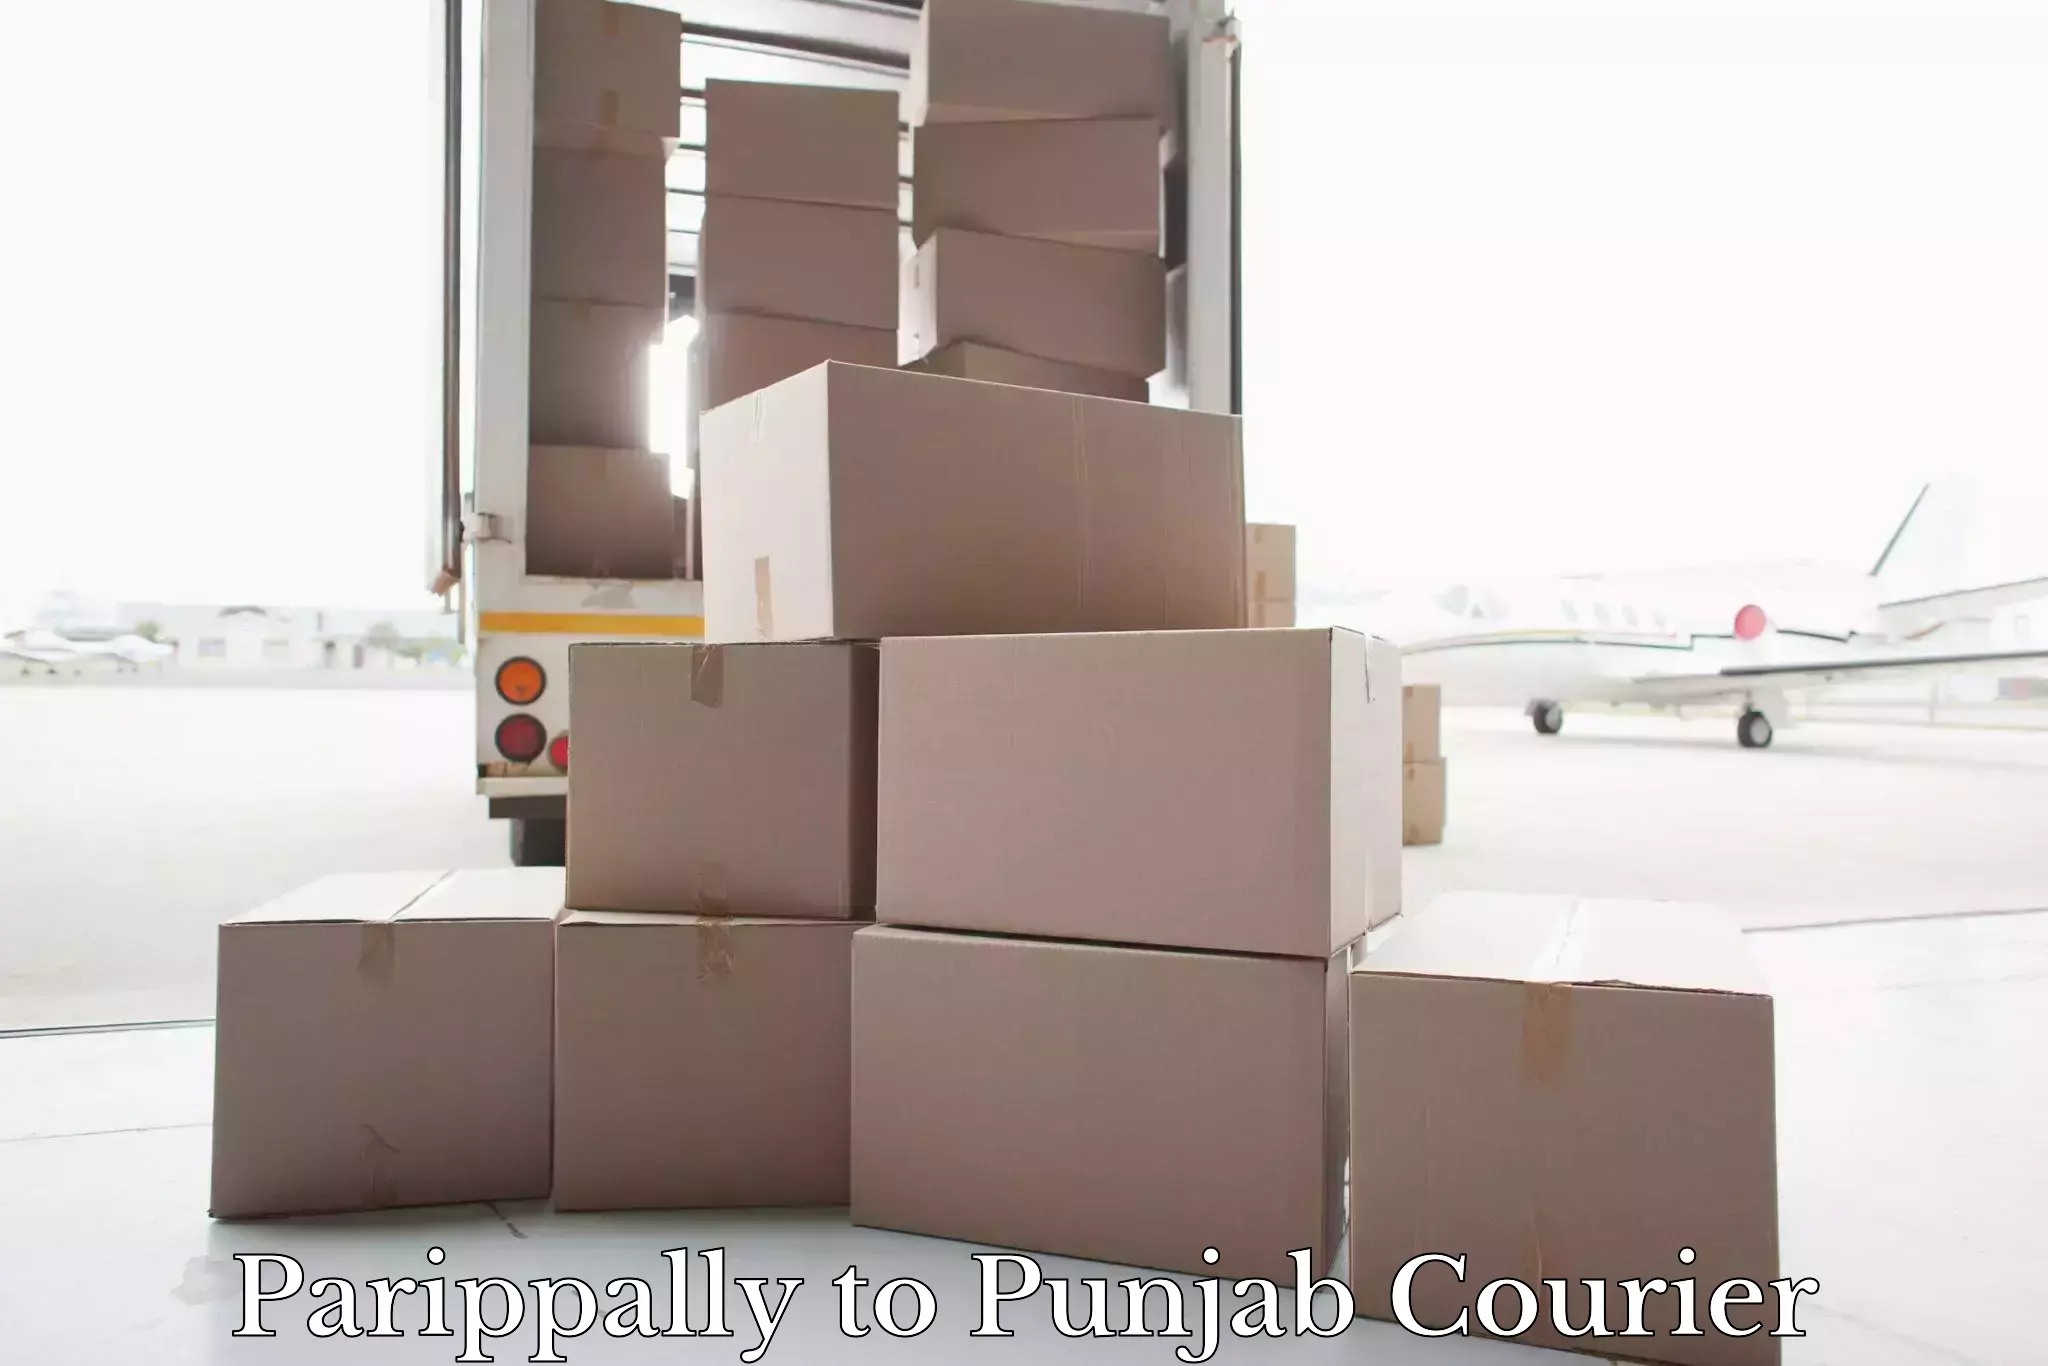 Reliable baggage delivery in Parippally to Punjab